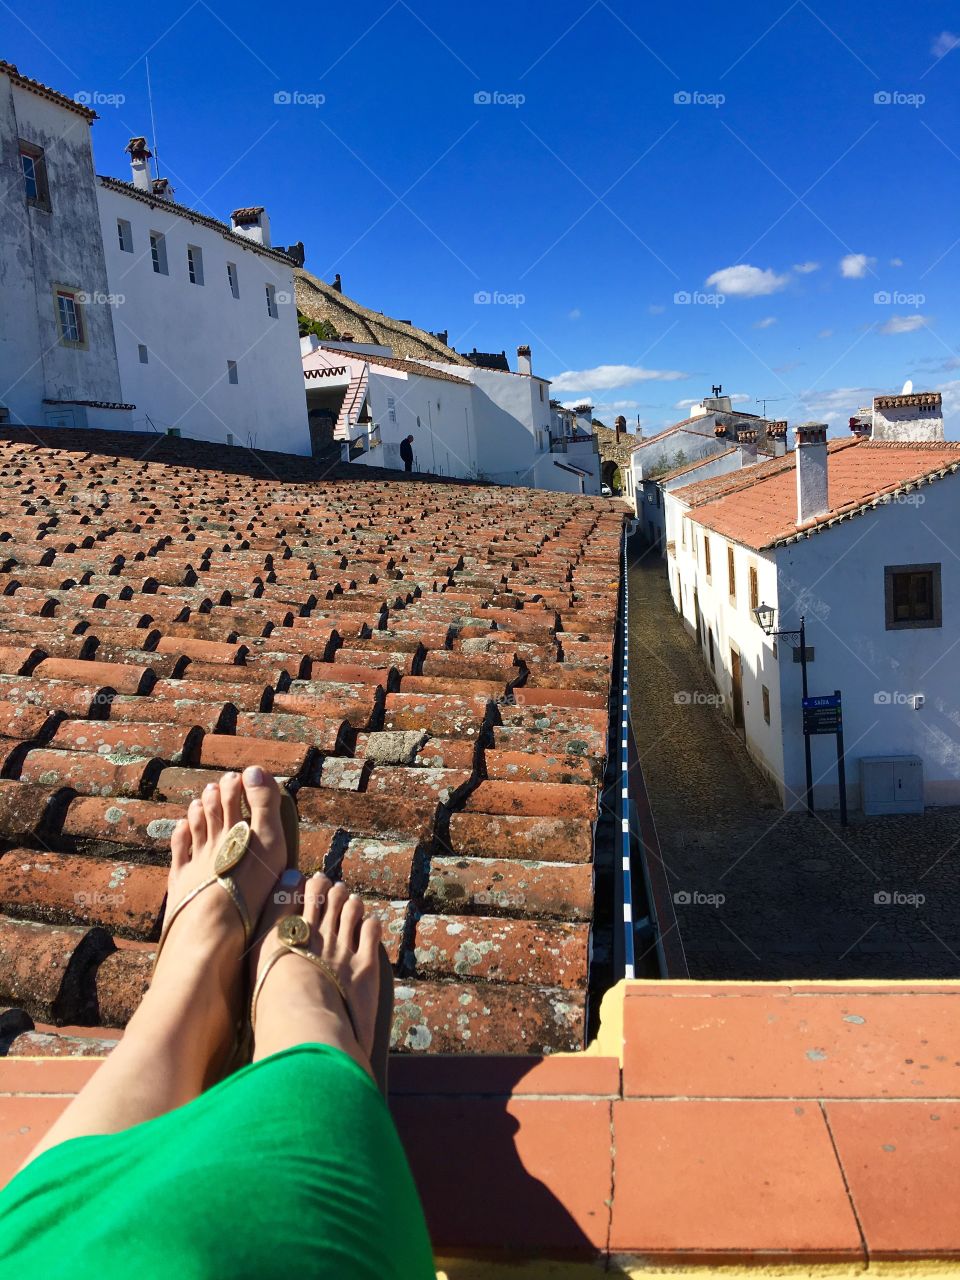 I bought this pair of Havianas in Brazil, been traveling around the world with them, really comfortable and suitable for all occasions , this photo is taken in Portugal